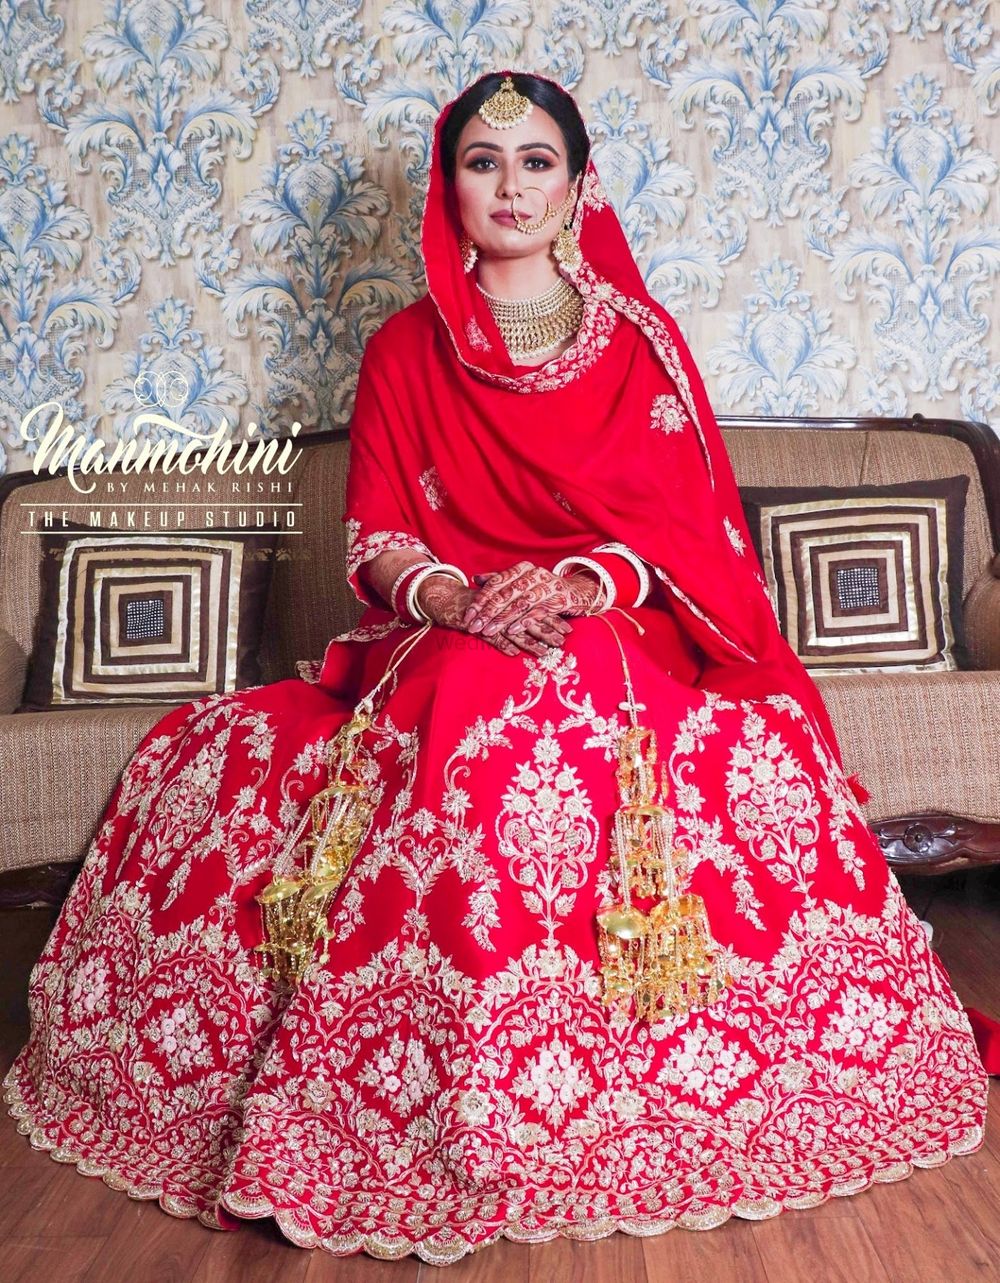 Photo From Bride Chamanjot - By Manmohini by Mehak Rishi